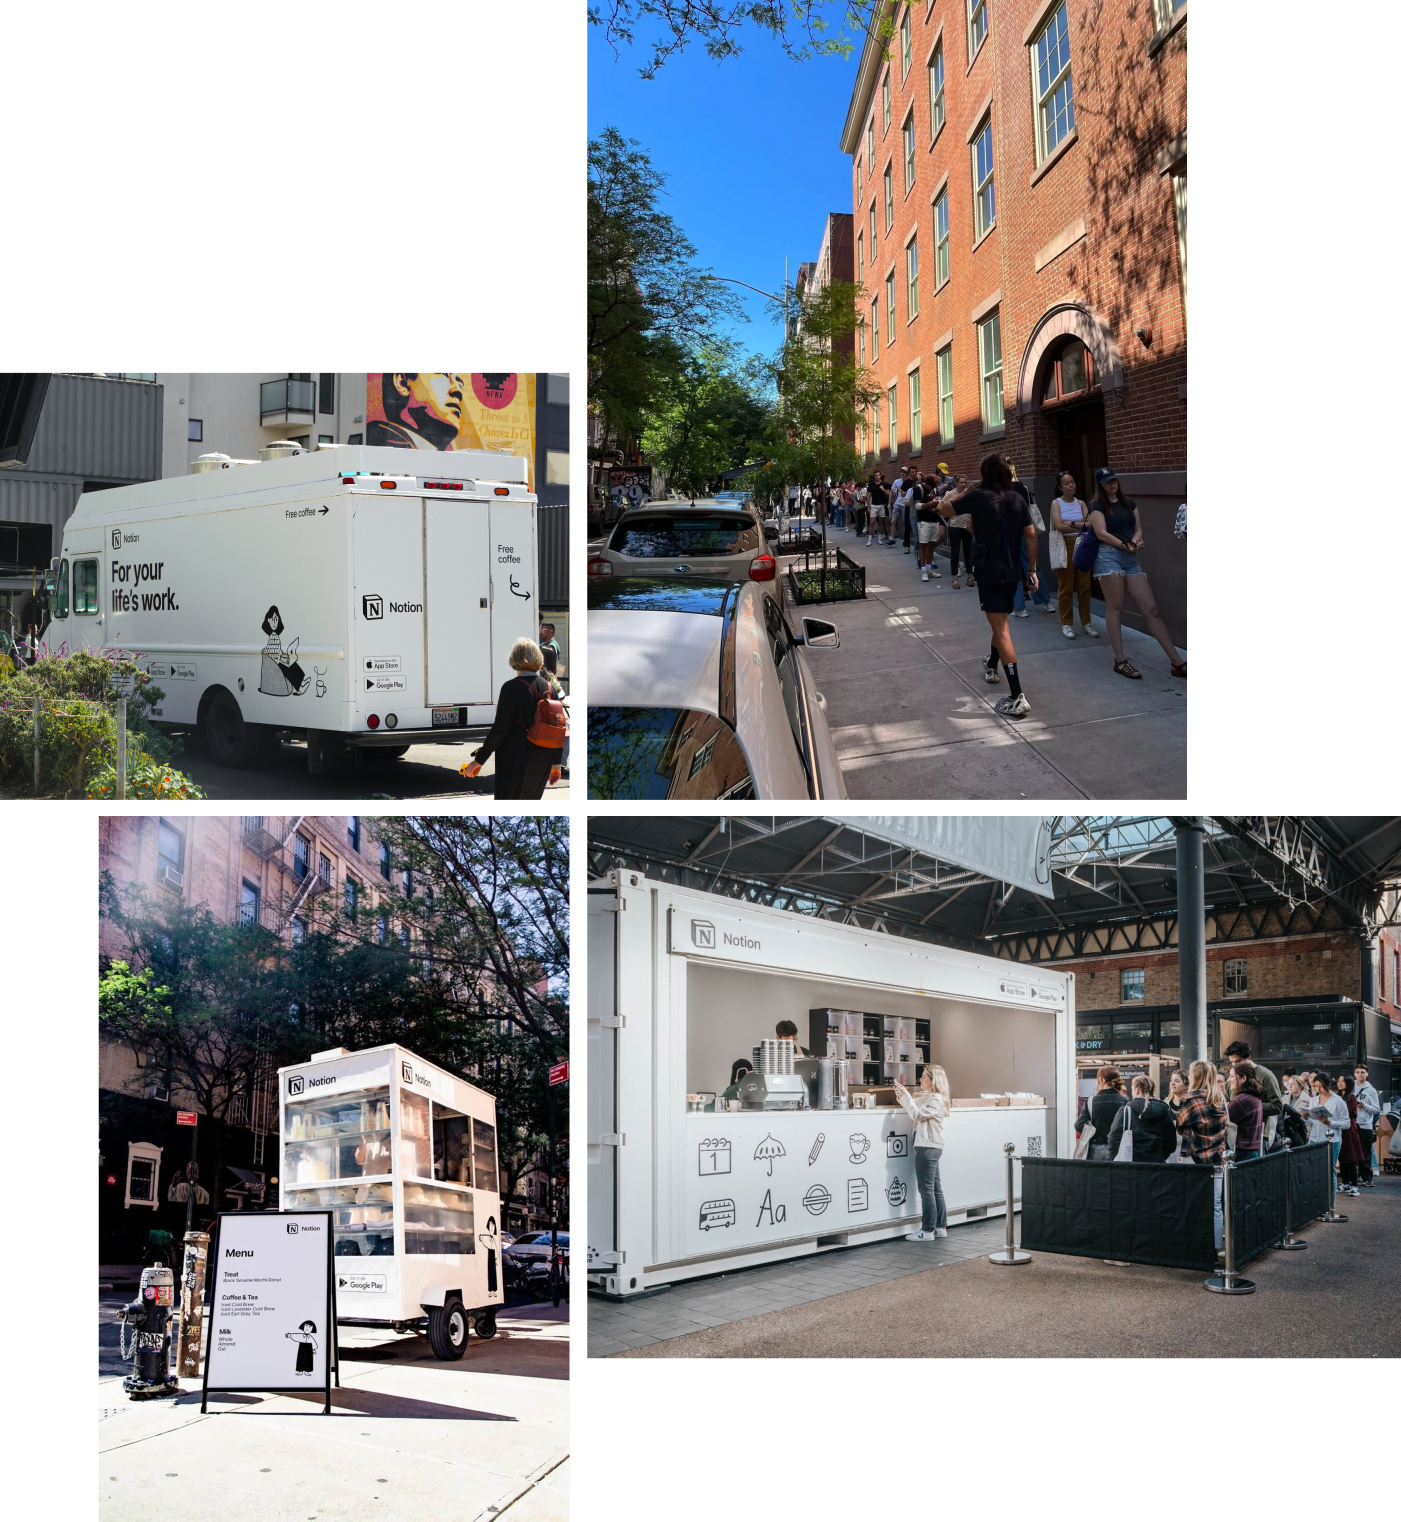 Clockwise from top left: Notion pop-up in San Francisco; lines at the pop-up in New York City; opening of Notion pop-up in London; mini coffee truck in New York City.